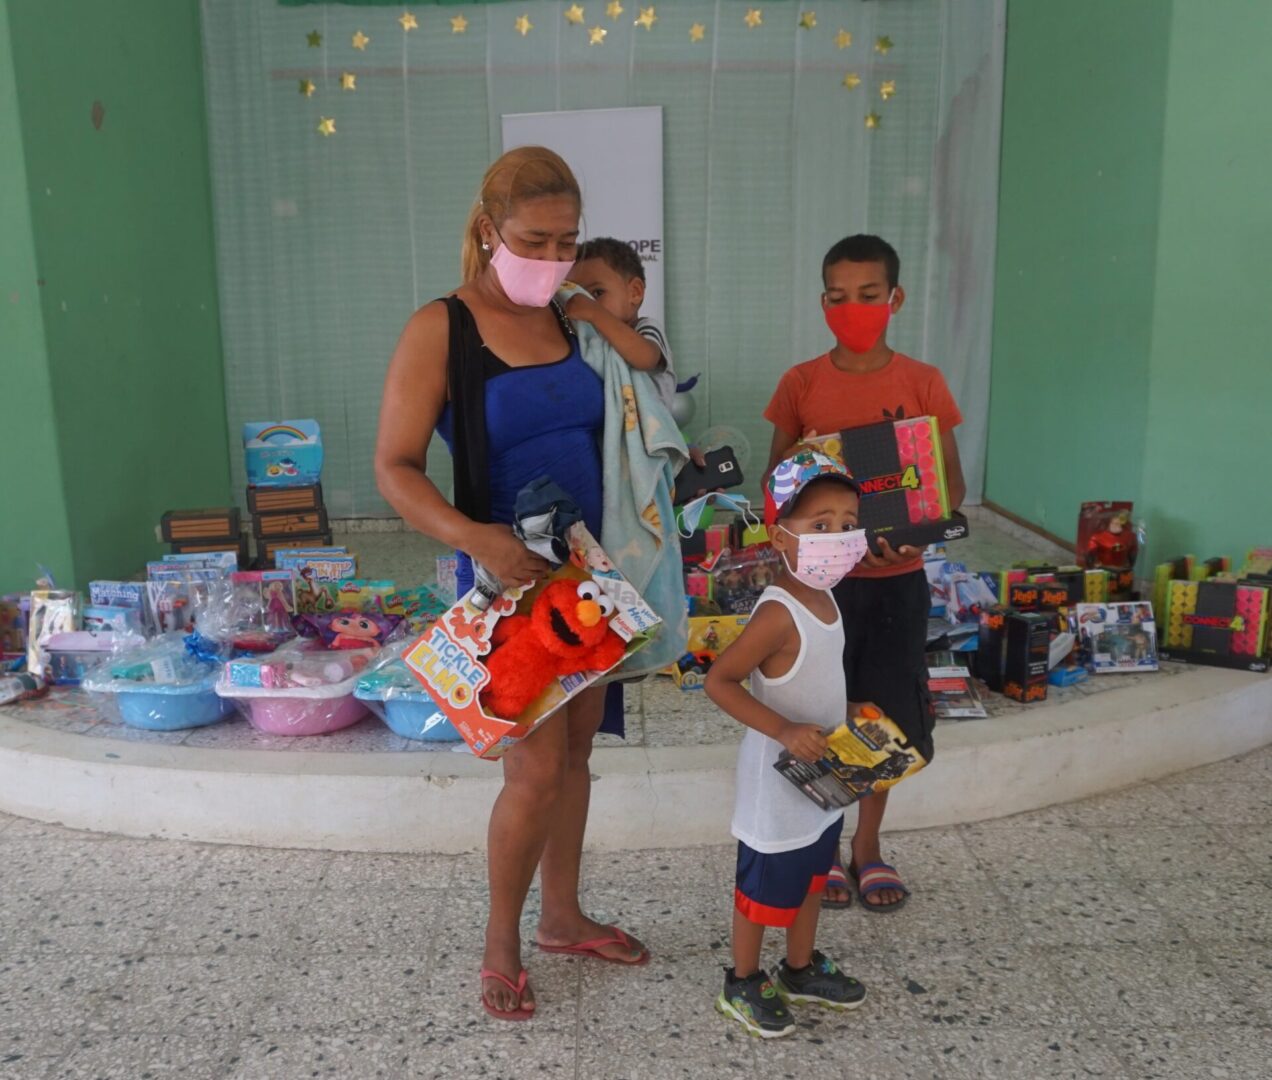 A woman carrying a boy and holding an Elmo toy and two boys holding their toys